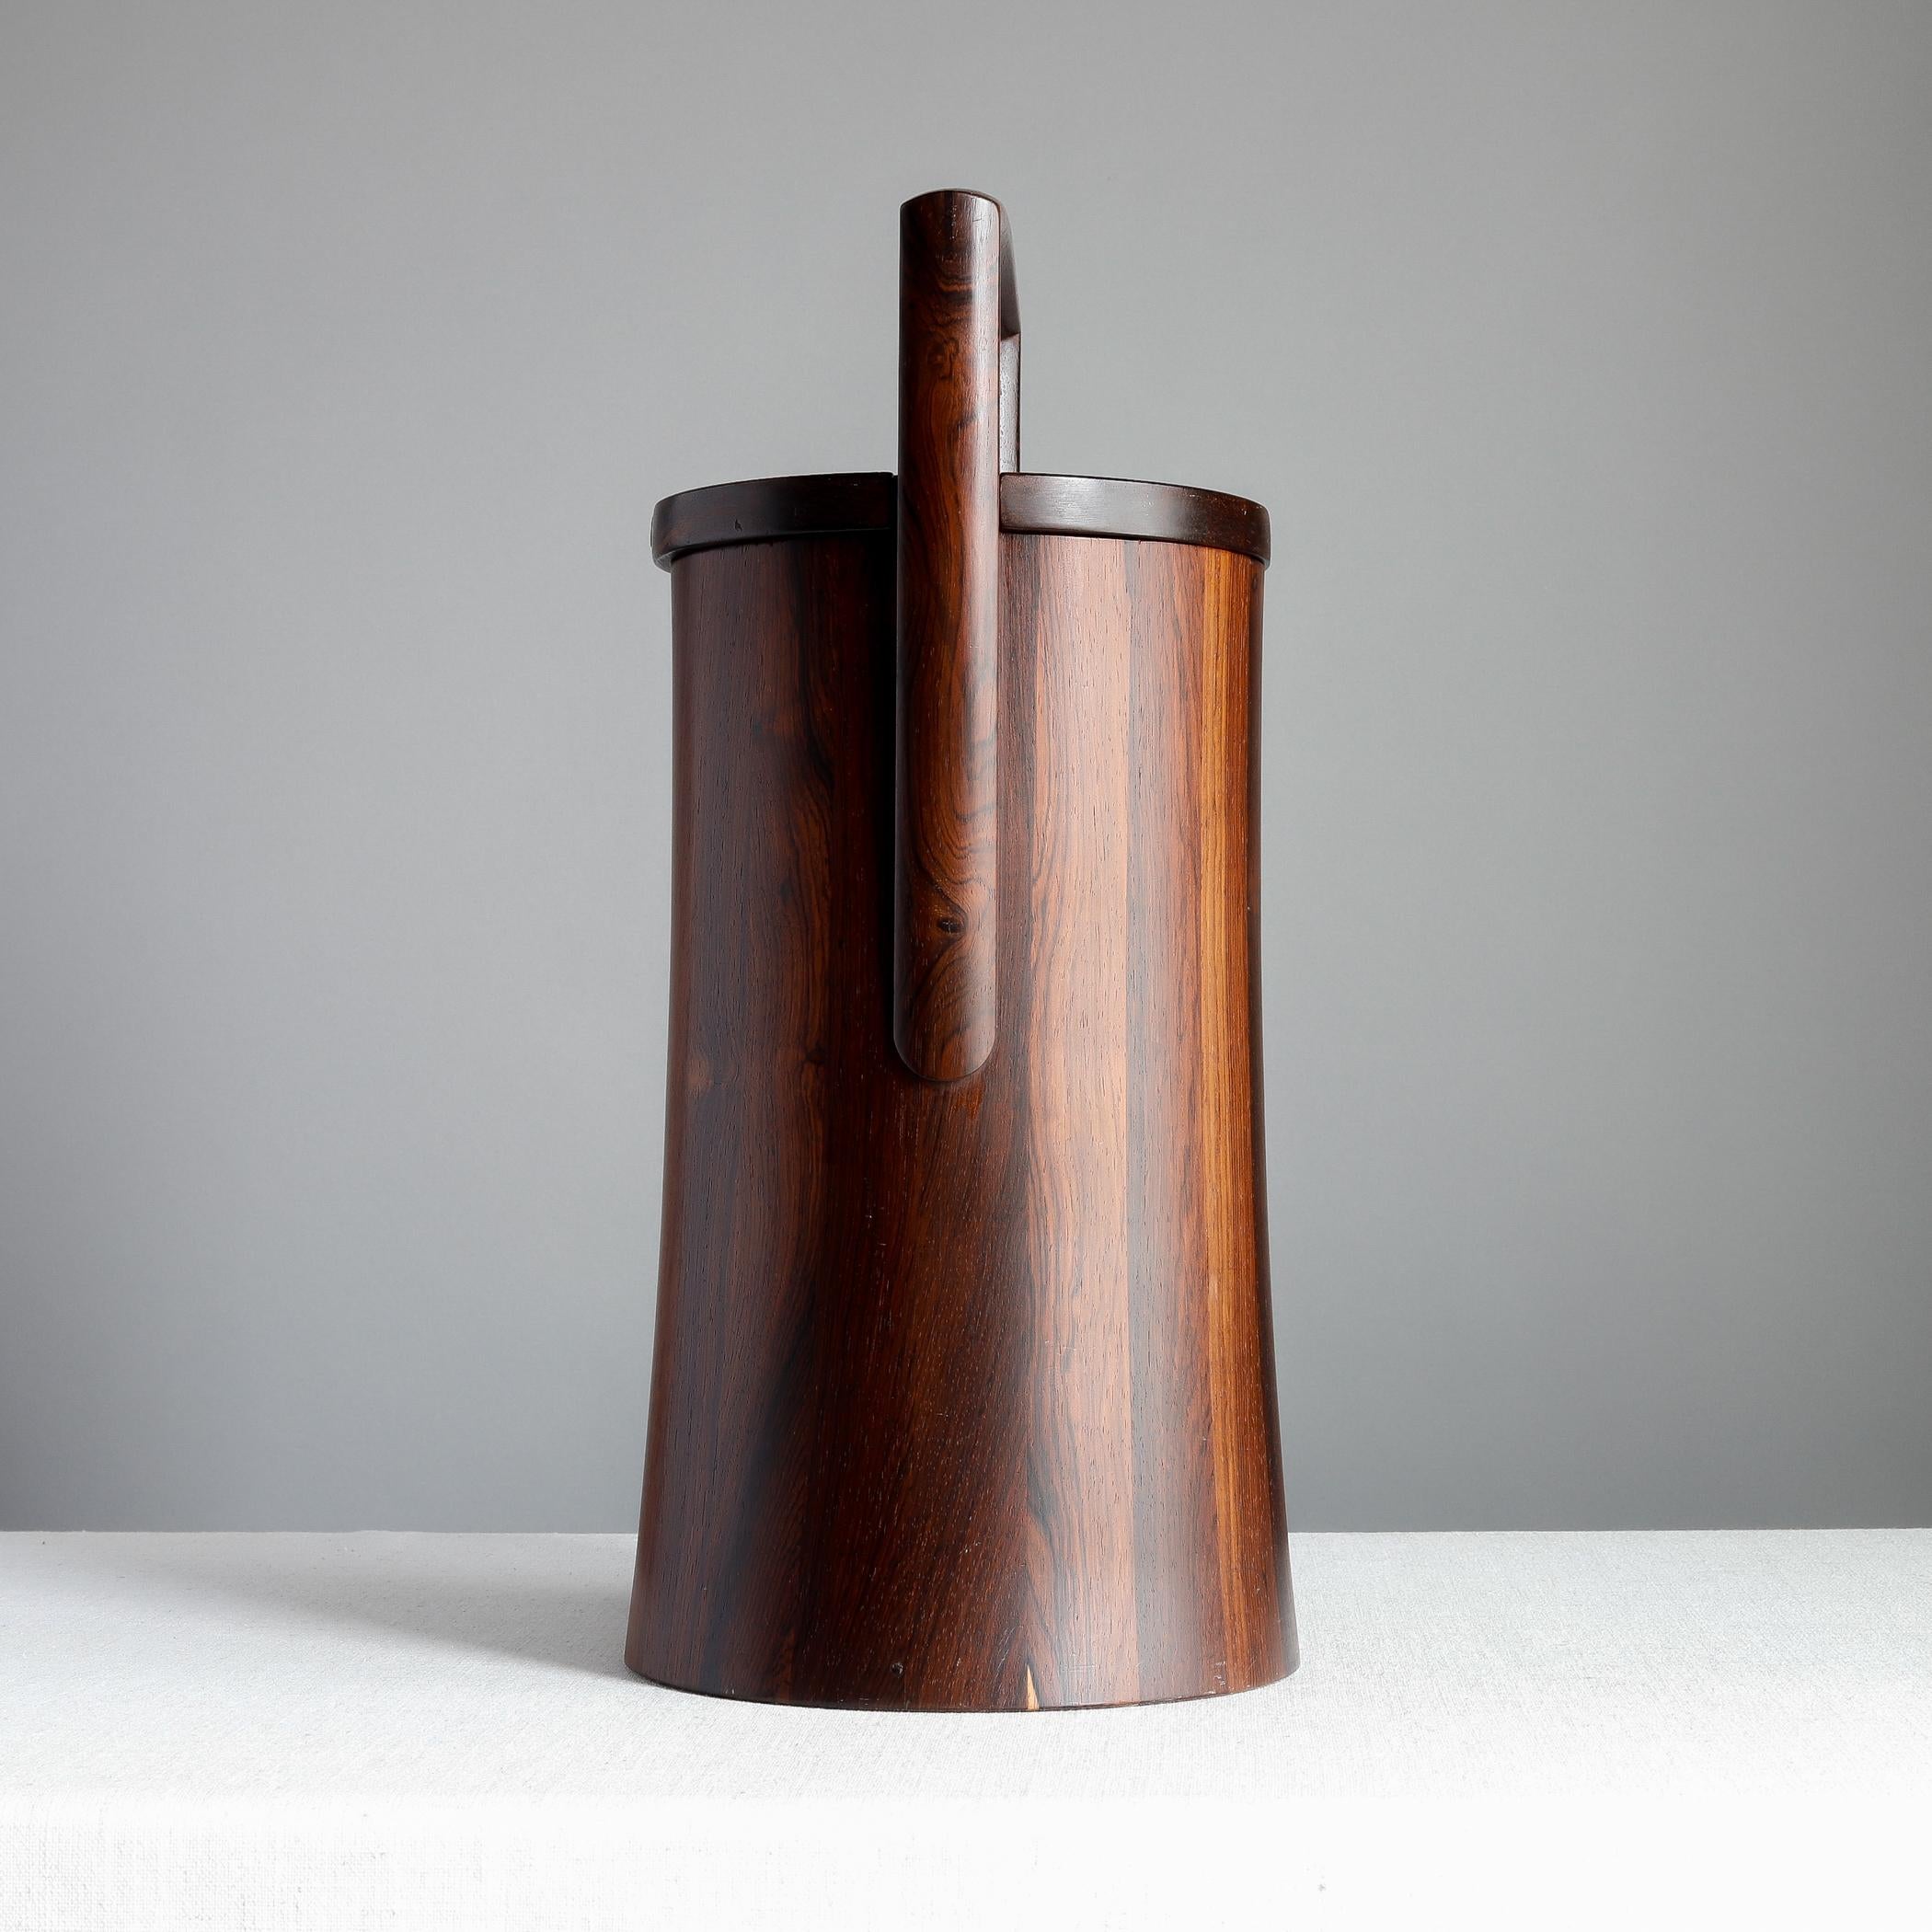 Staved palisander ice bucket designed by Jens Quistgaard for Dansk. This is from the 'Rare Woods' line, a group of wares made from exotic woods from around the globe, dating to the early 1960s. The lid fits snugly and tilts to lift out, black